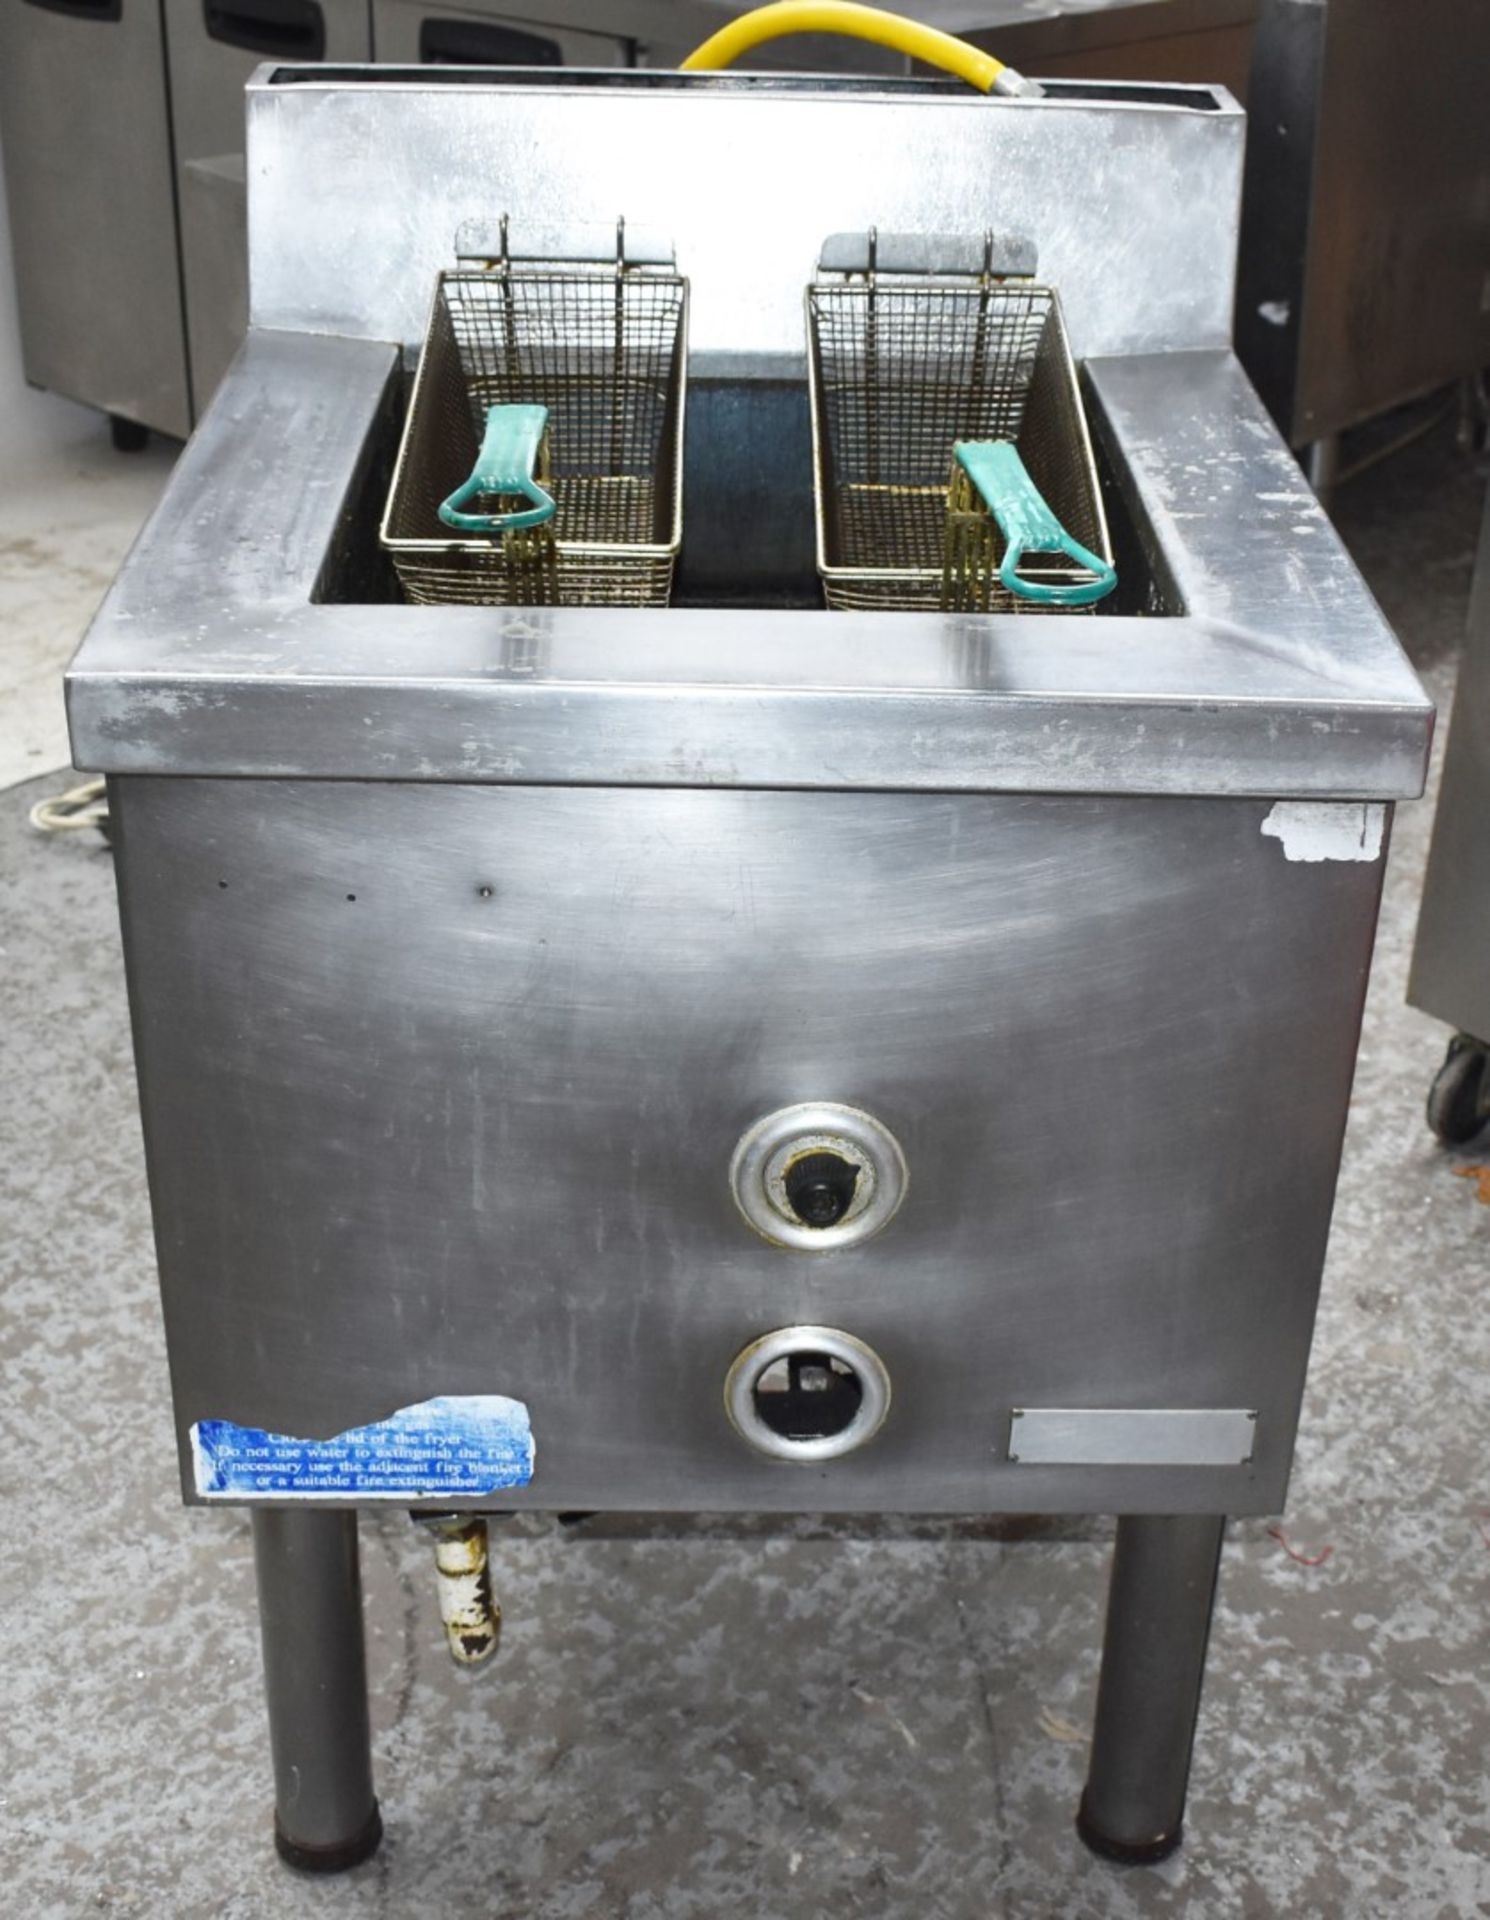 1 x Twin Basket Natural Gas Fryer With Stainless Steel Finish - H89 x W65.5 x D70 cms - CL459 - - Image 7 of 7